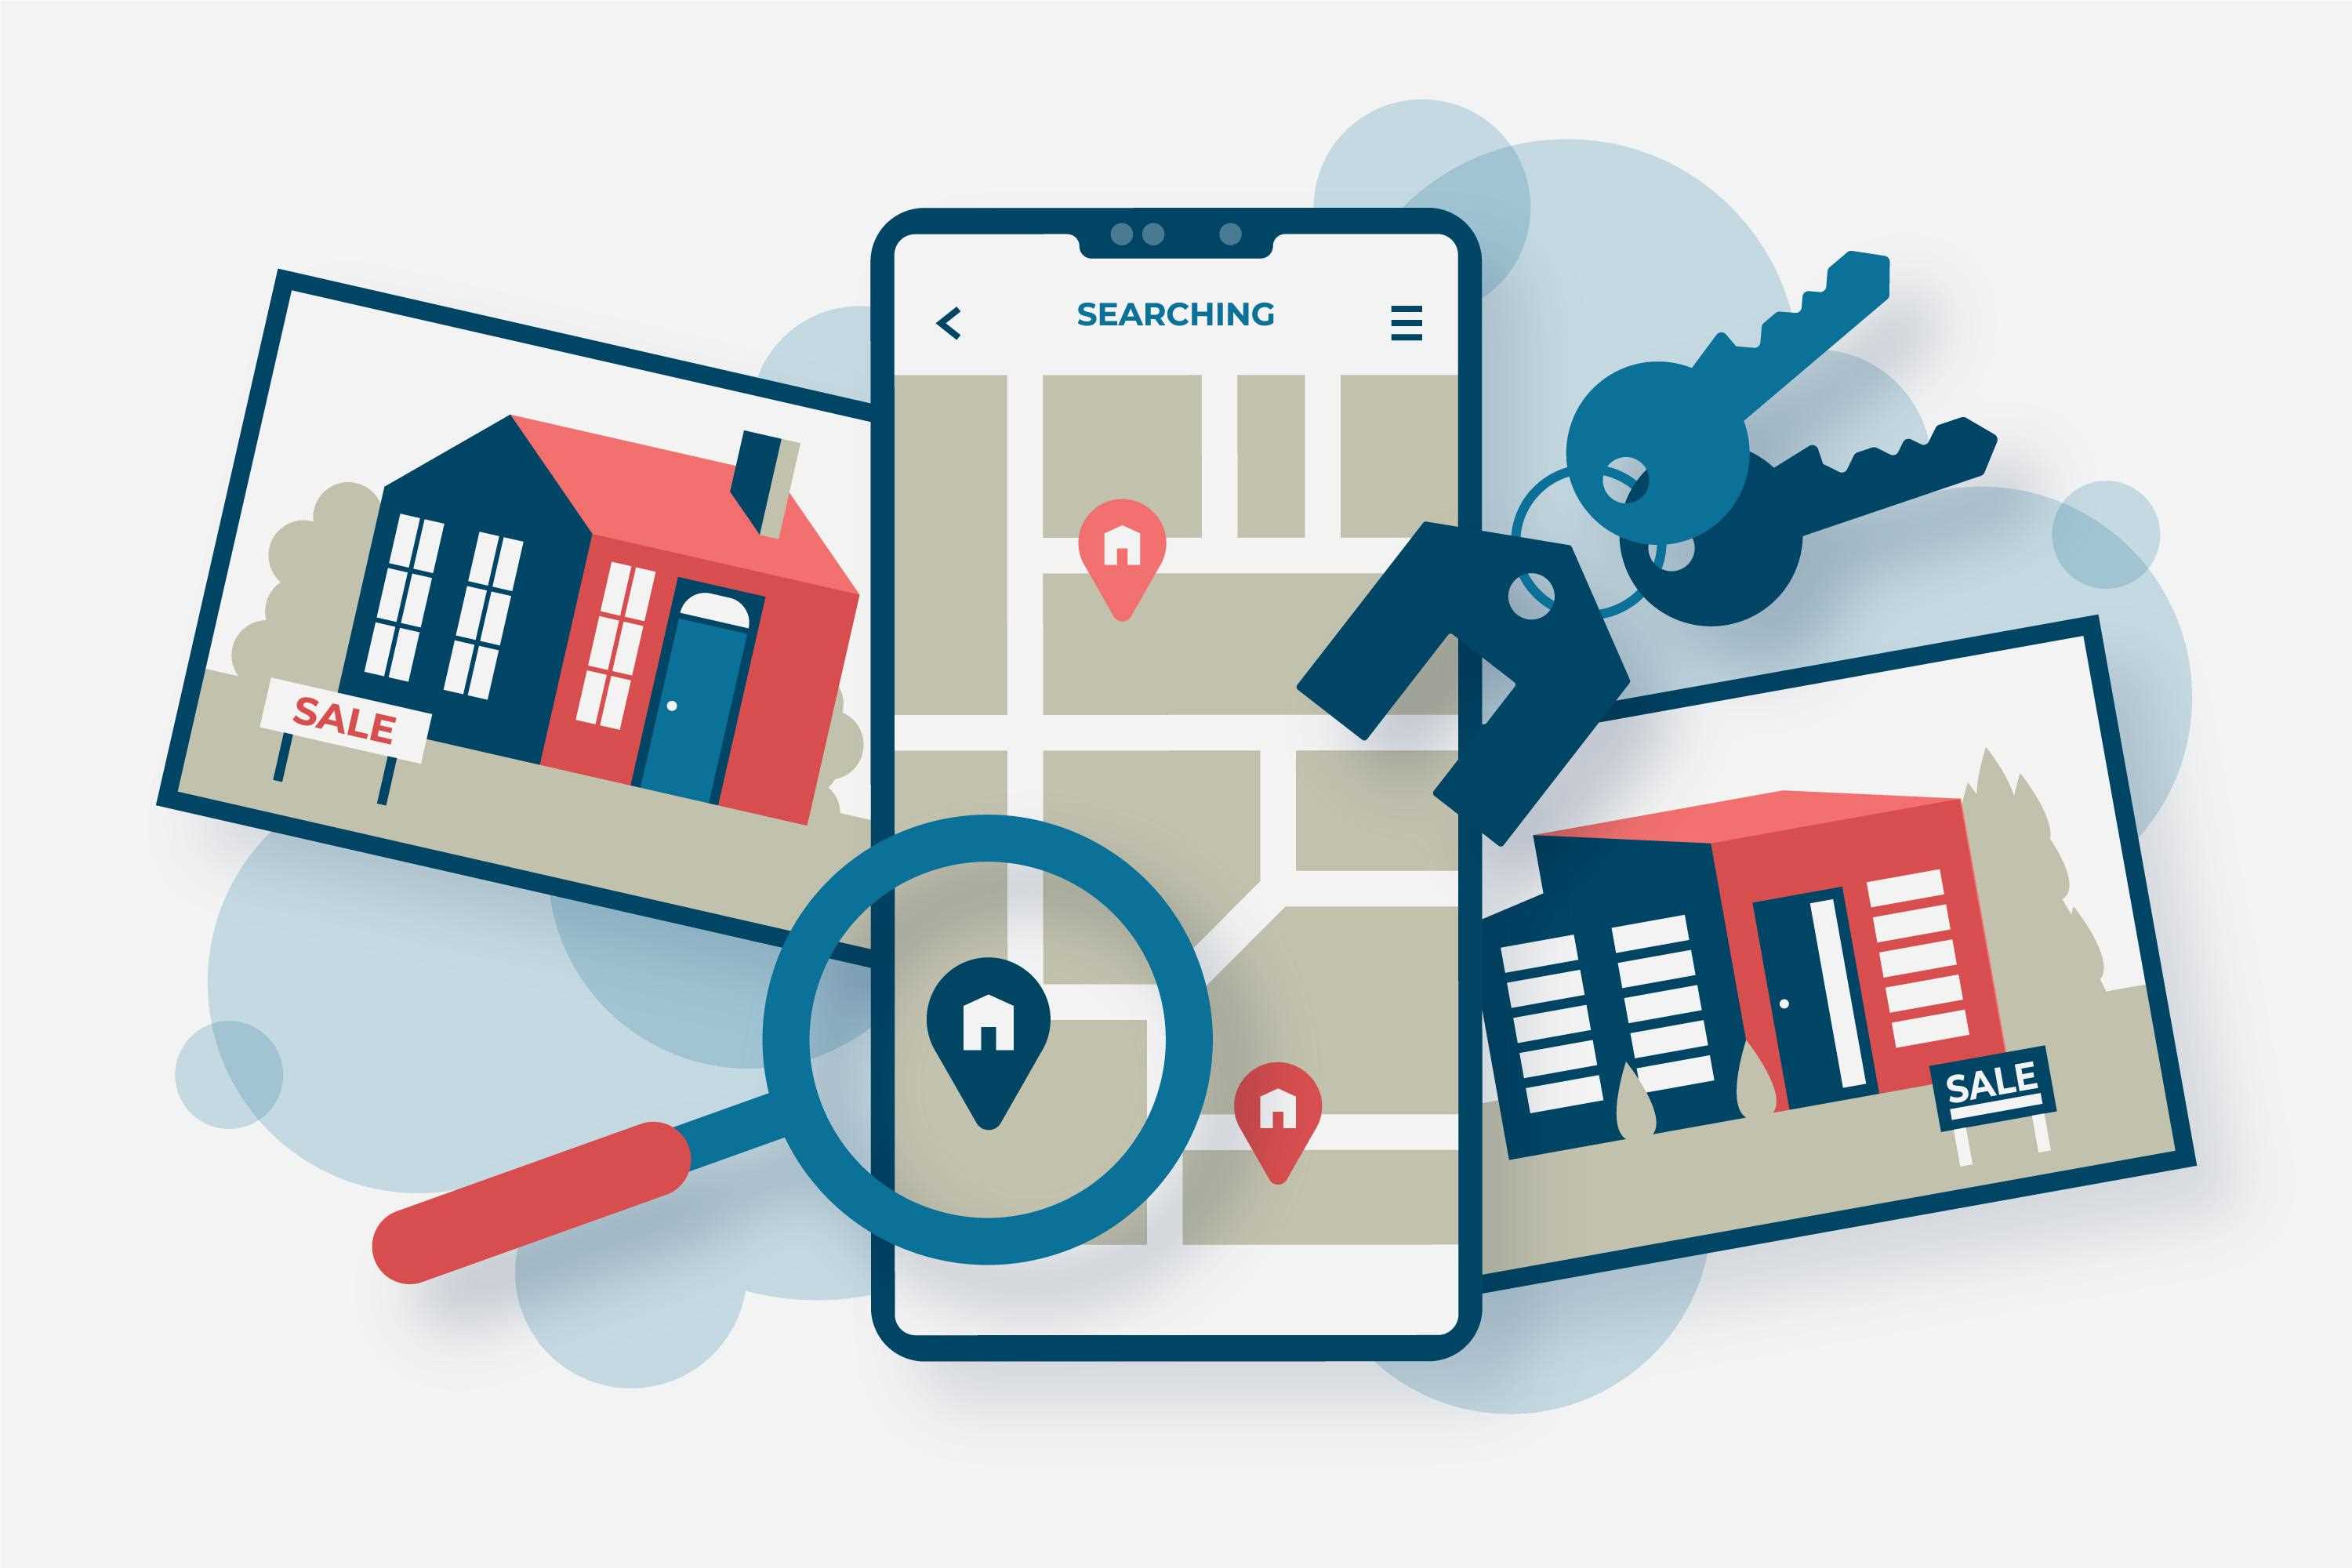 Do Not Overlook Location When Searching for a Home